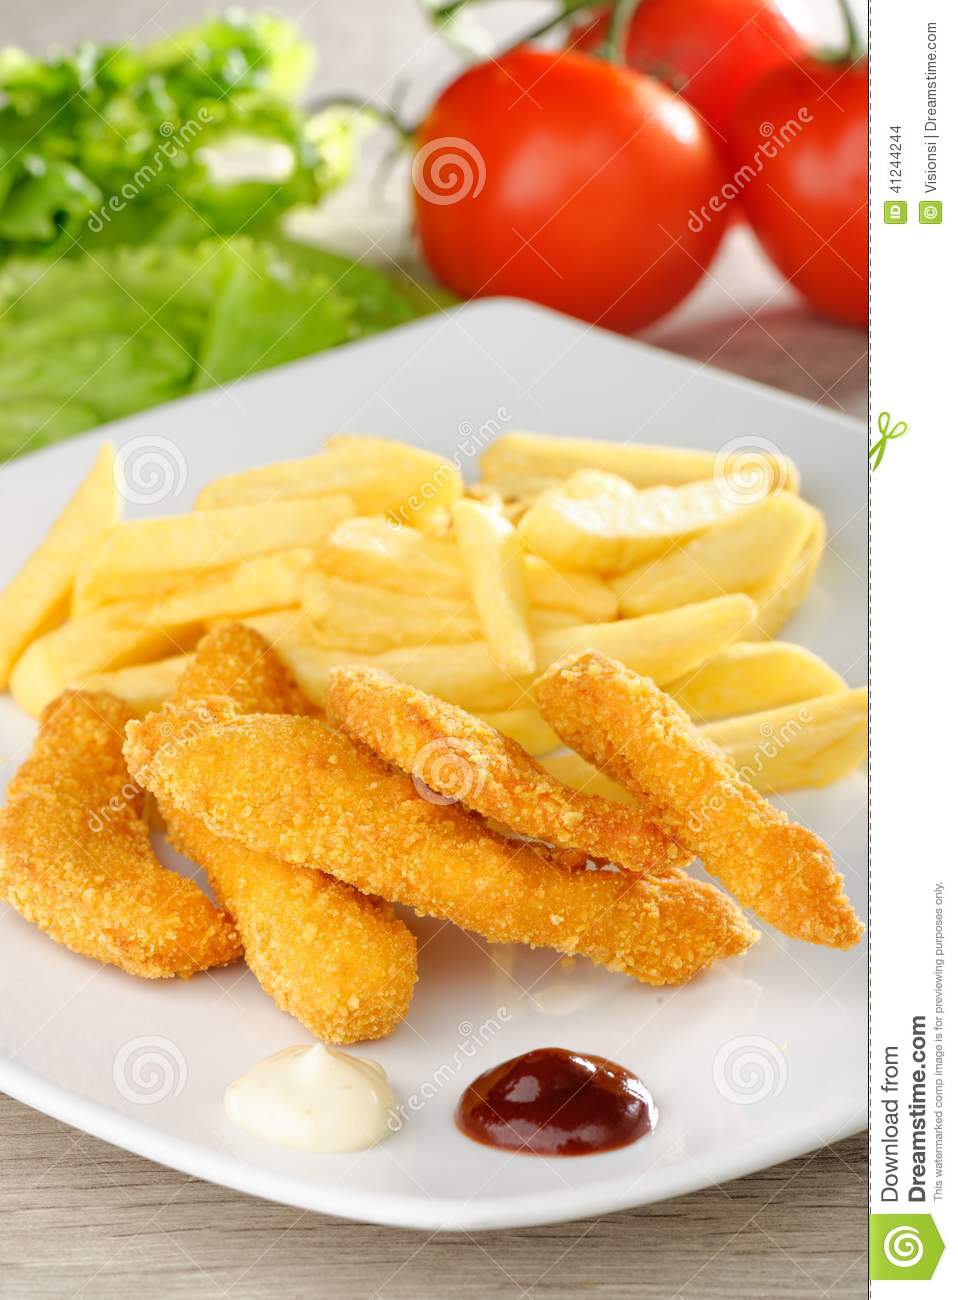 Chicken Nuggets Sticky Fingers With French Fries Stock Photo   Image